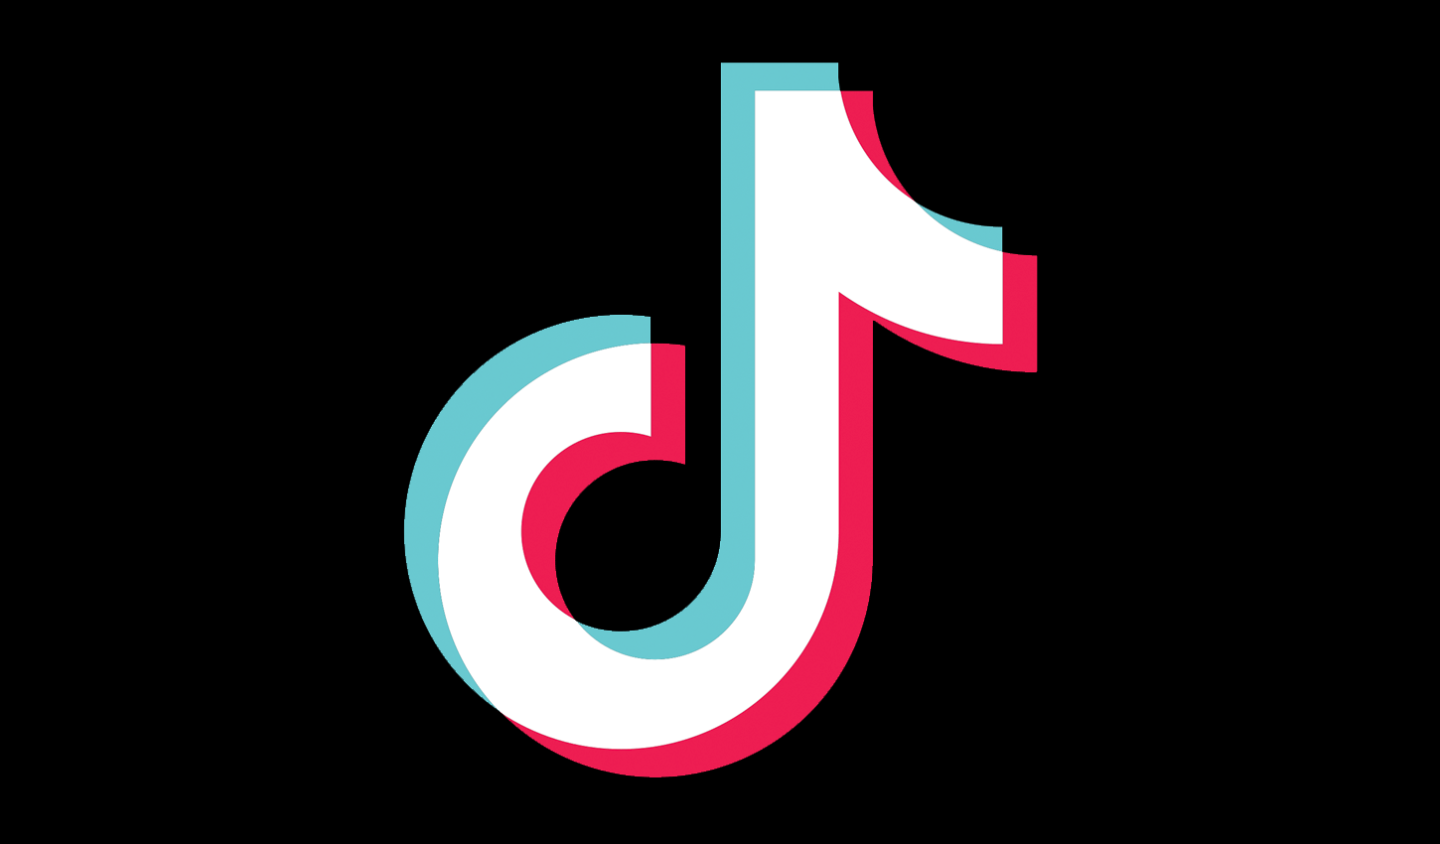 1. Why is TikTok Important for Digital Marketers 2. How to promote your brand successfully on TikTok 3. Tips to make your TikTok Marketing Strategy Successful 4. Conclusion